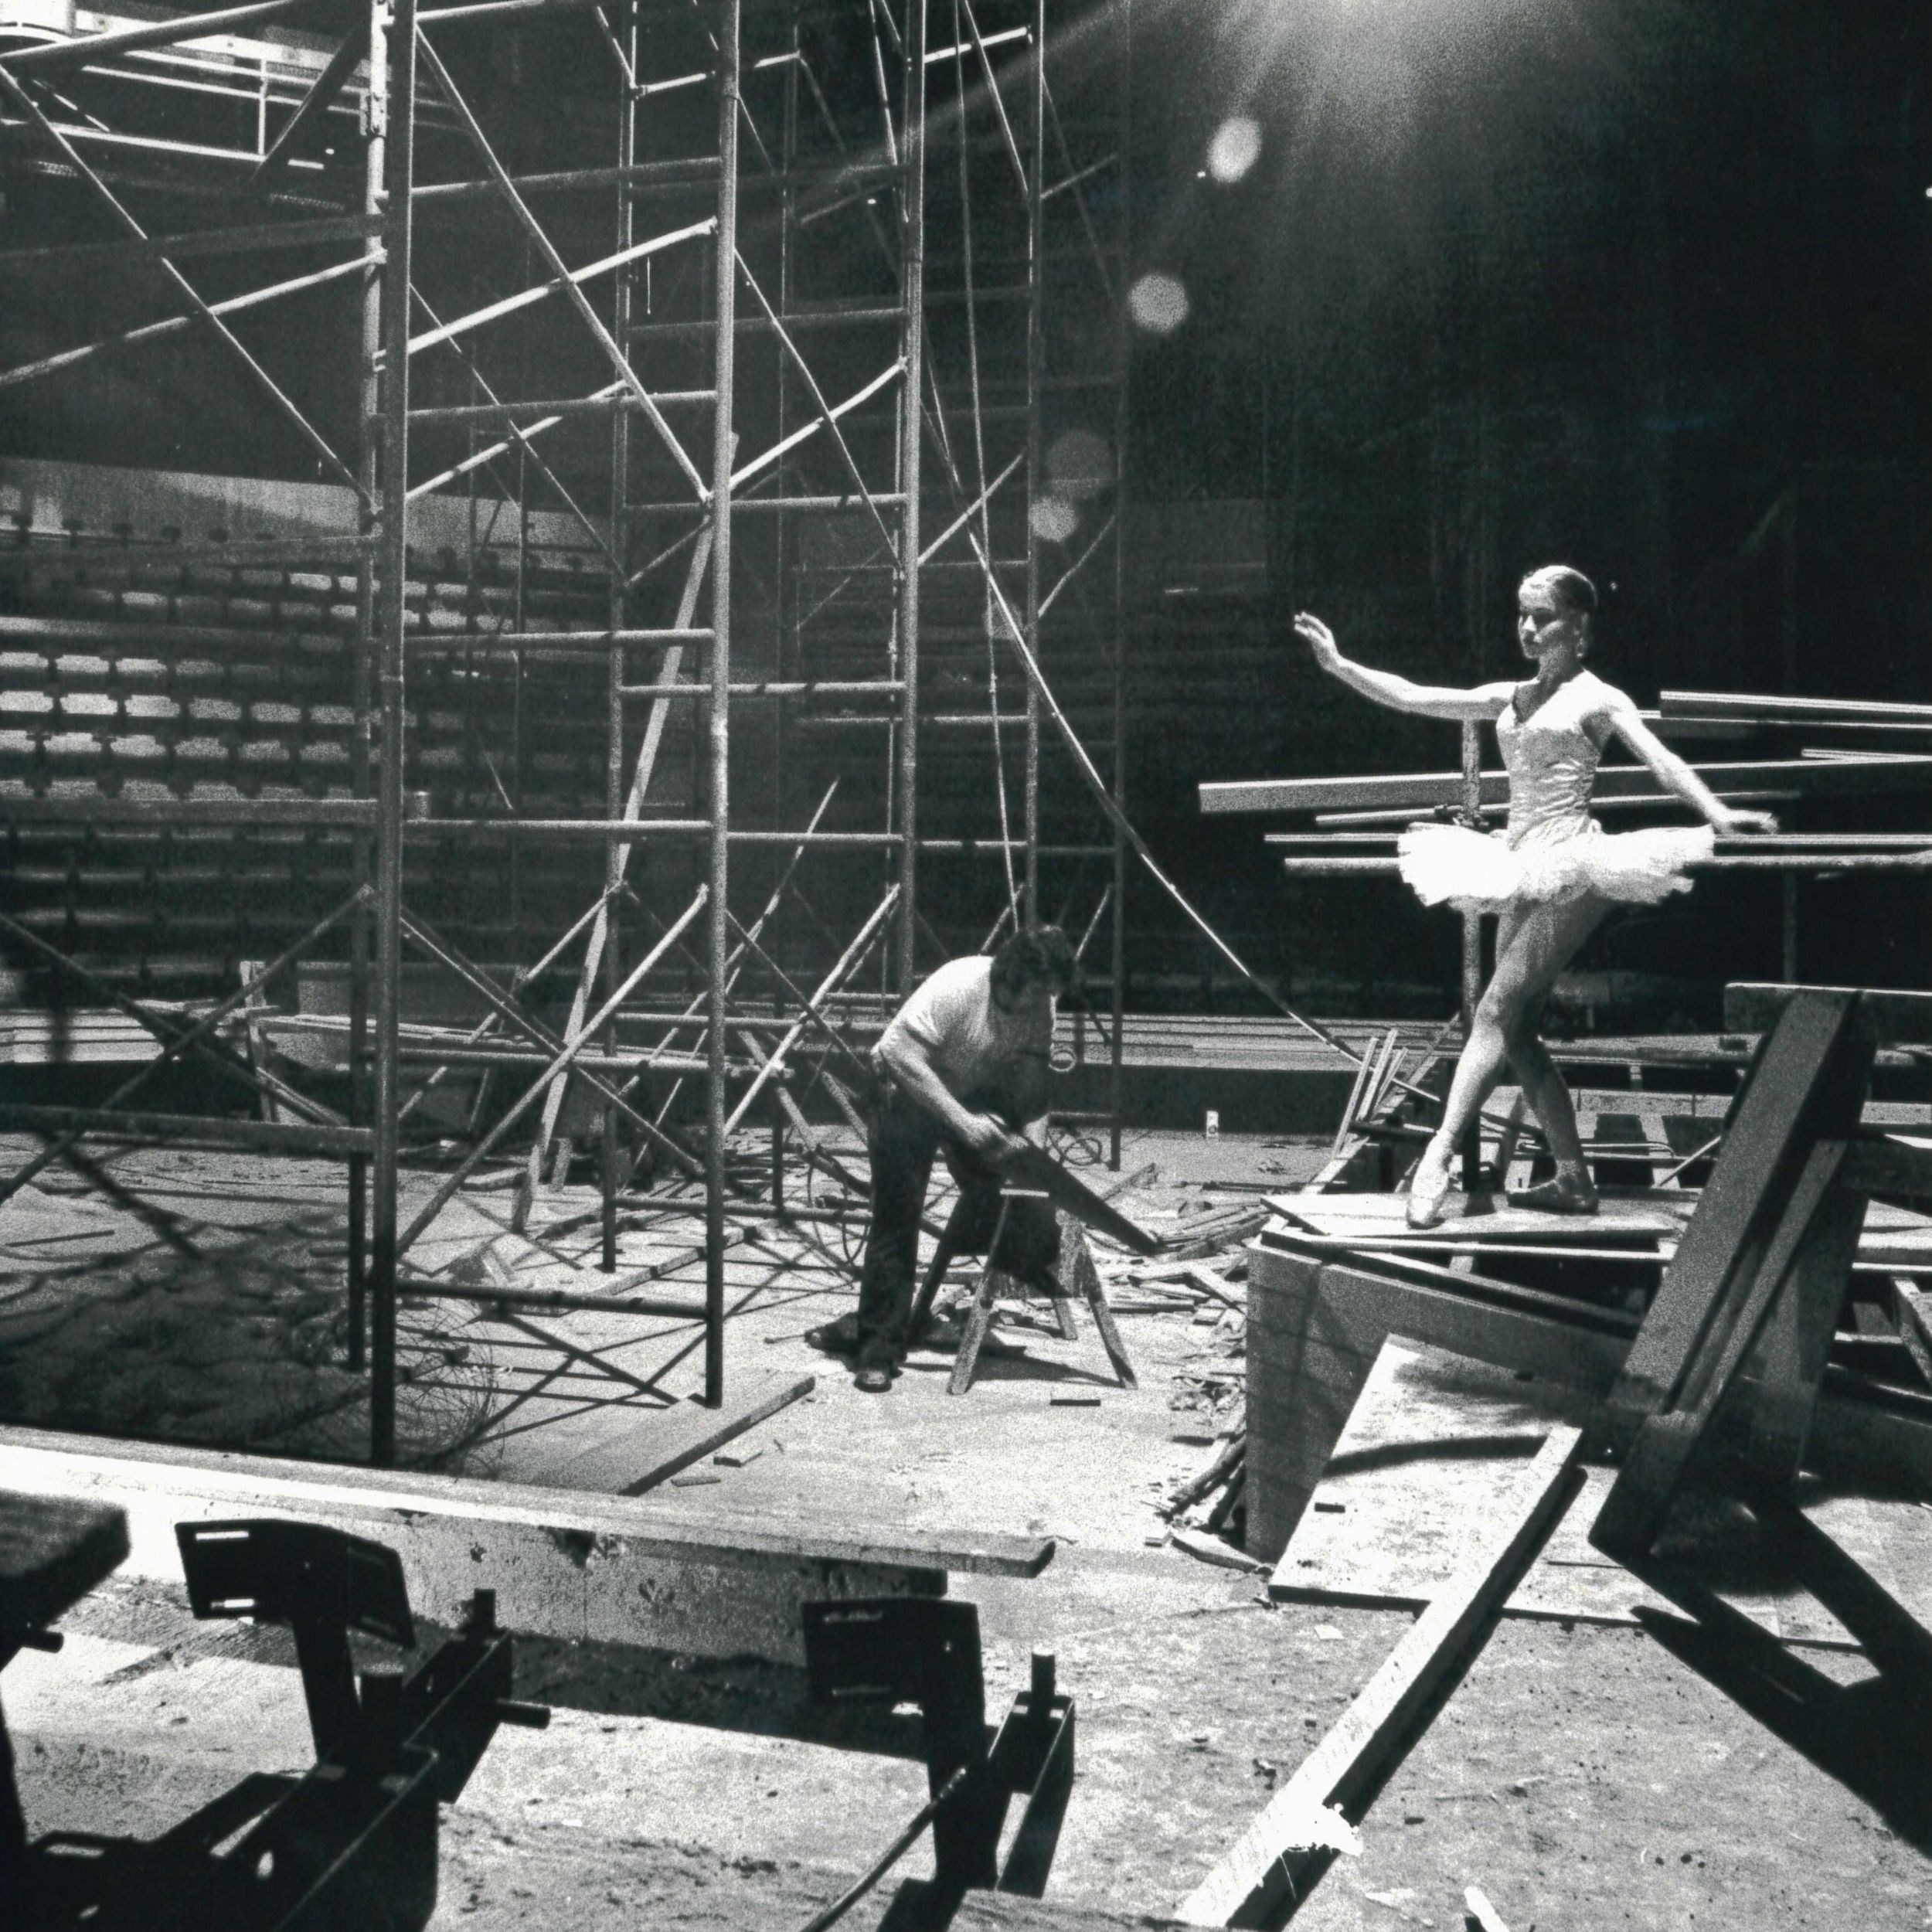 Black and white archival image of the construction of the York Theatre with a ballerina perched on building materials. 